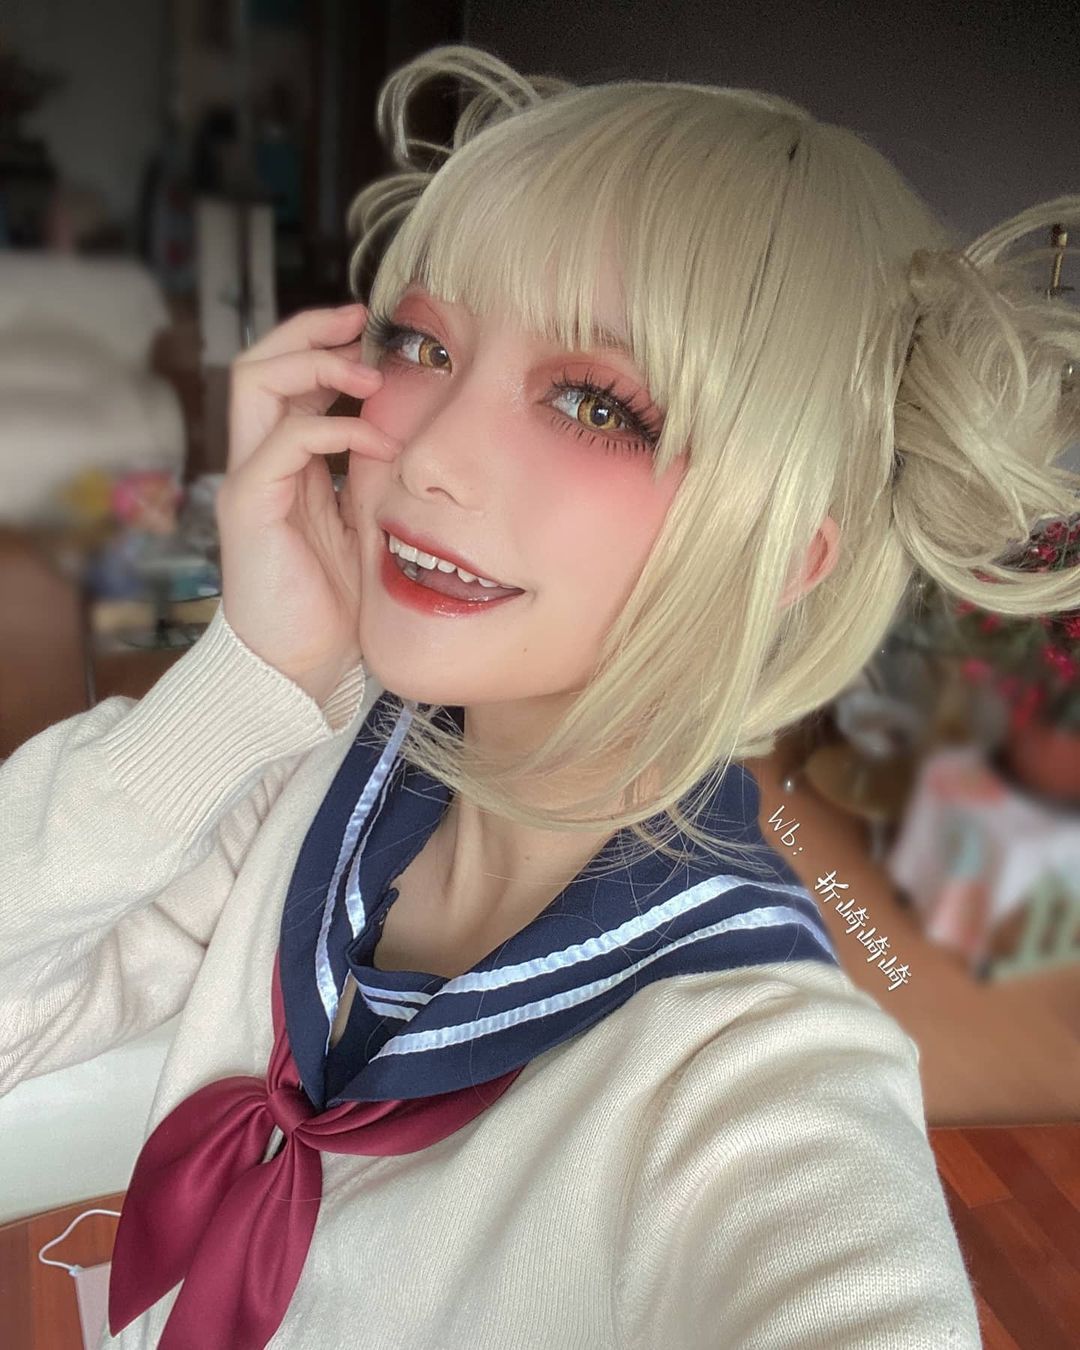 My Hero Academia: 10 Himiko Toga Cosplay Straight From The Show